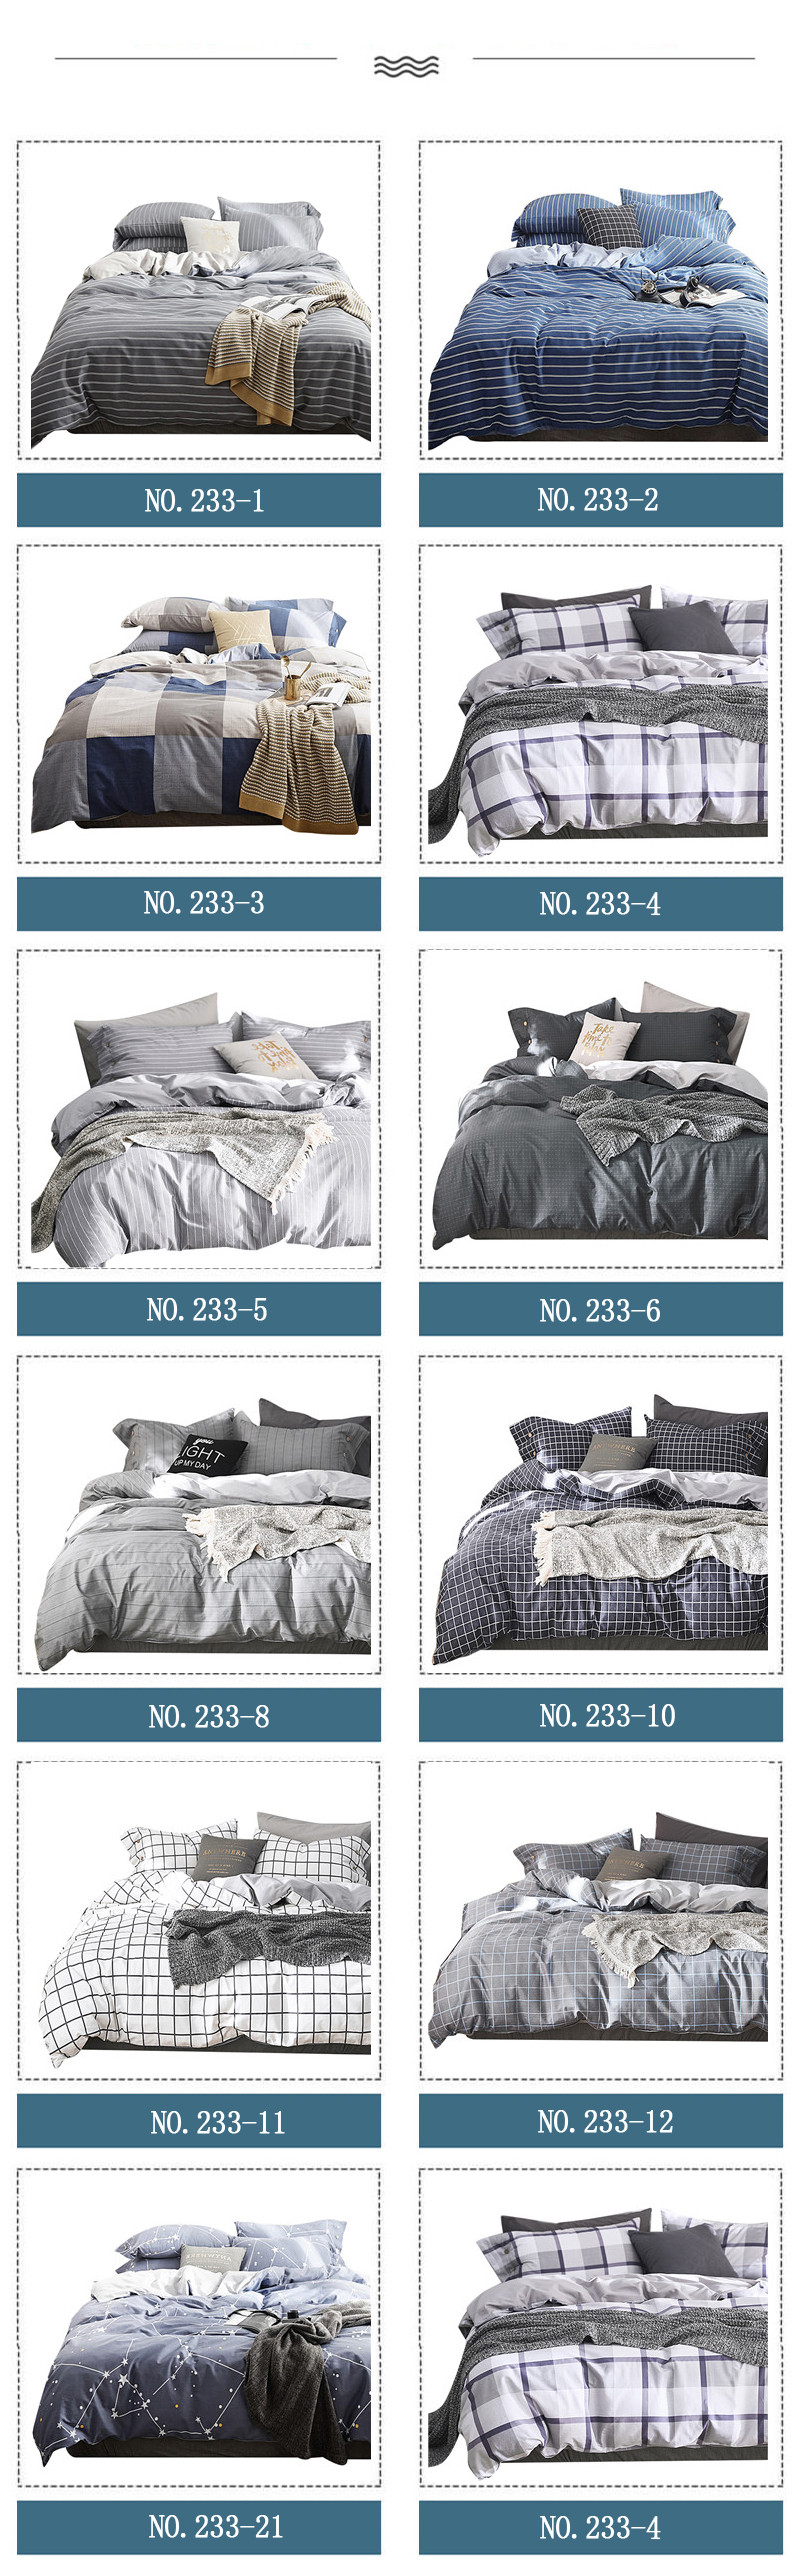 Bed Sheets Hot Sale New Product